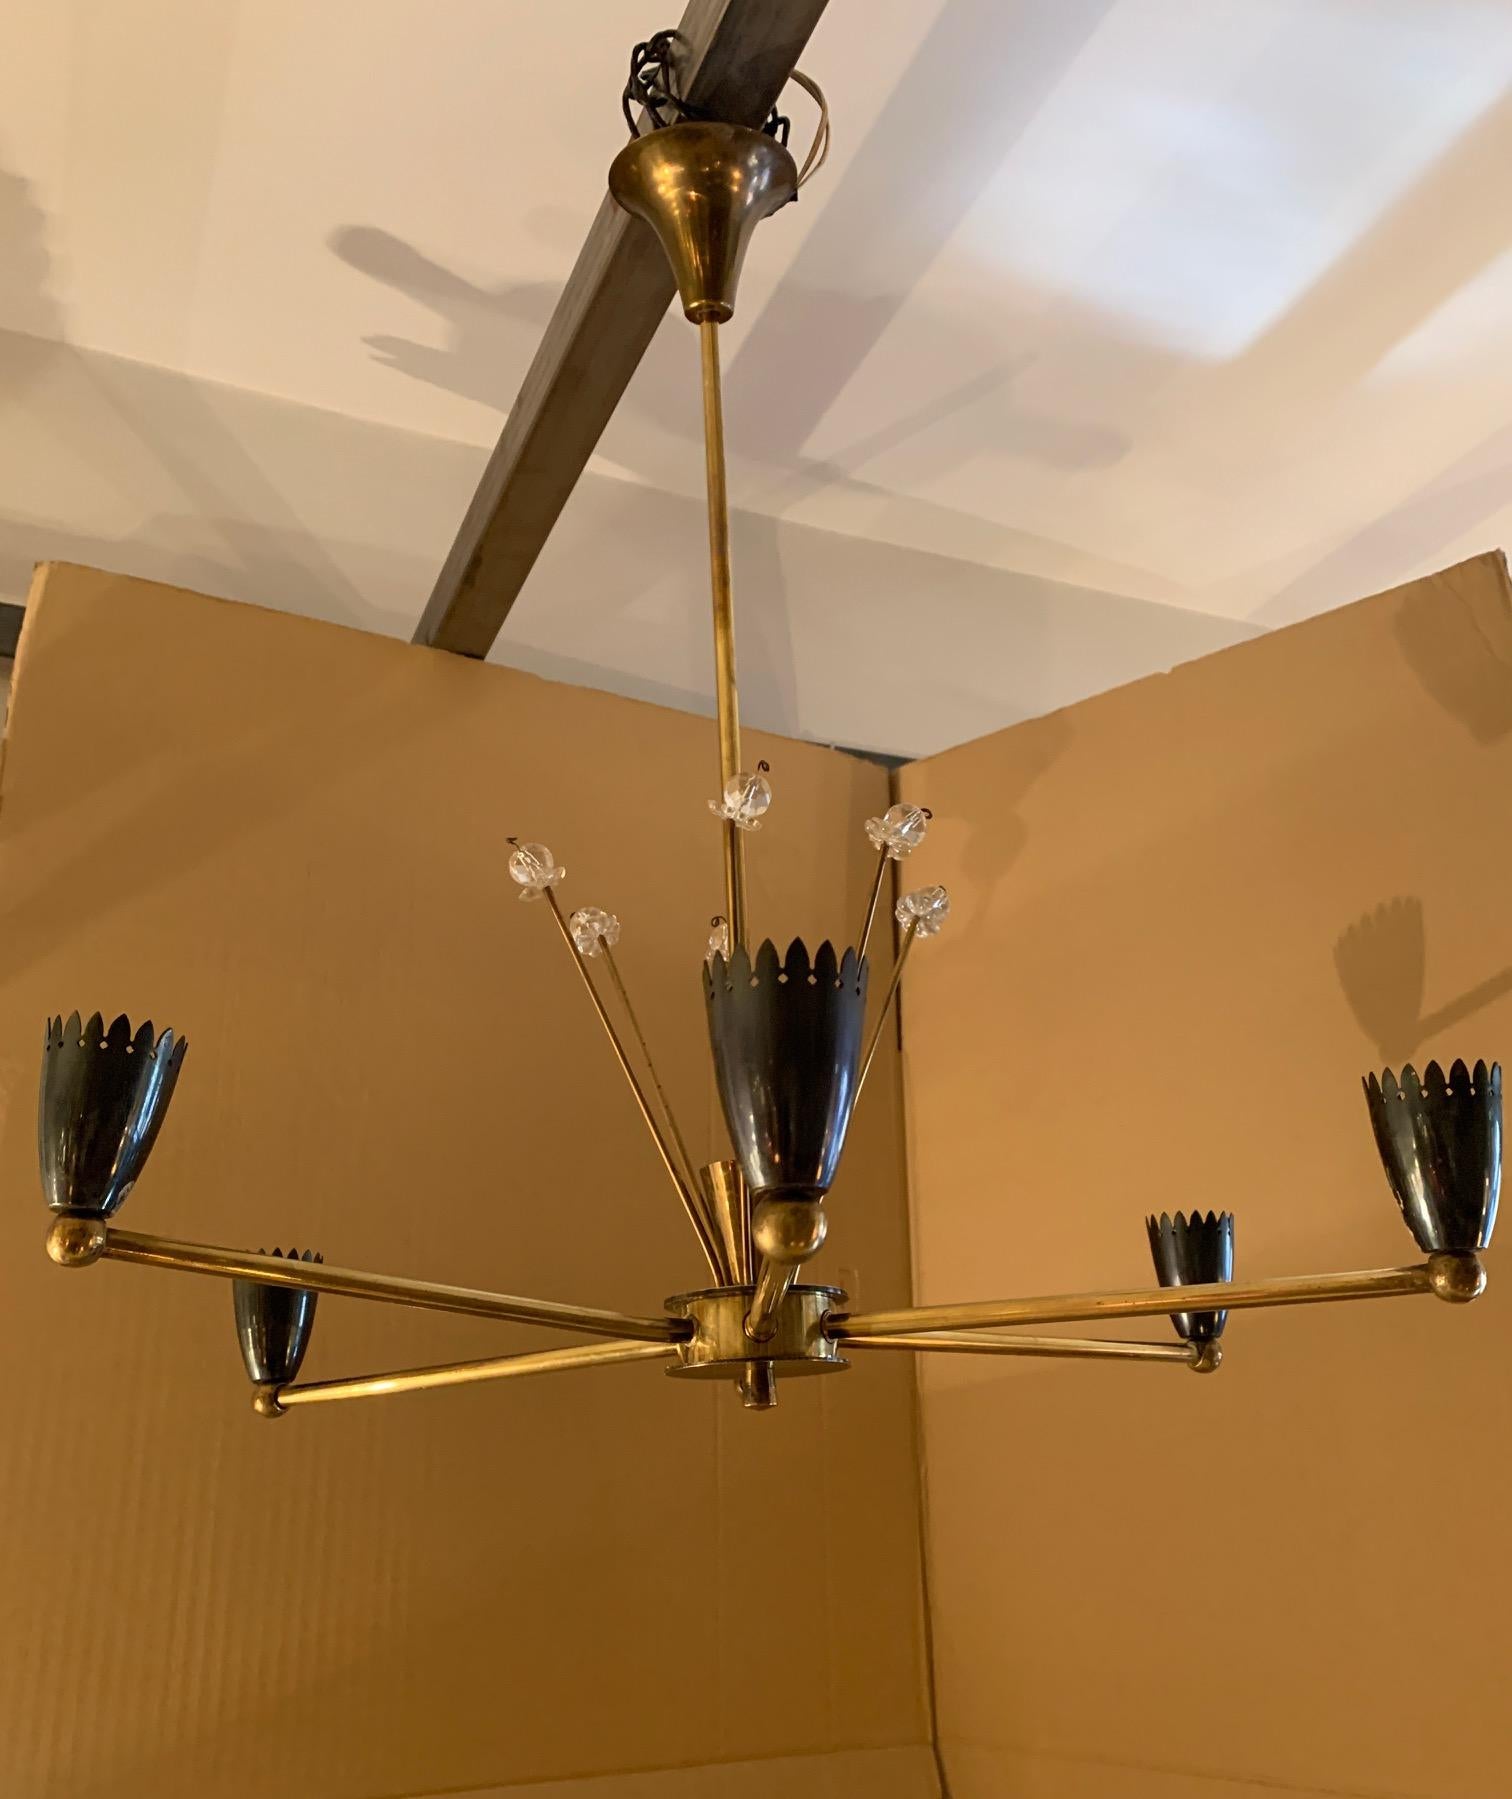 French chandelier, by Maison Arlus, in golden brass, each one finished in the shape of an enameled glass, in the main column it is surrounded by brass rods finished in glass.